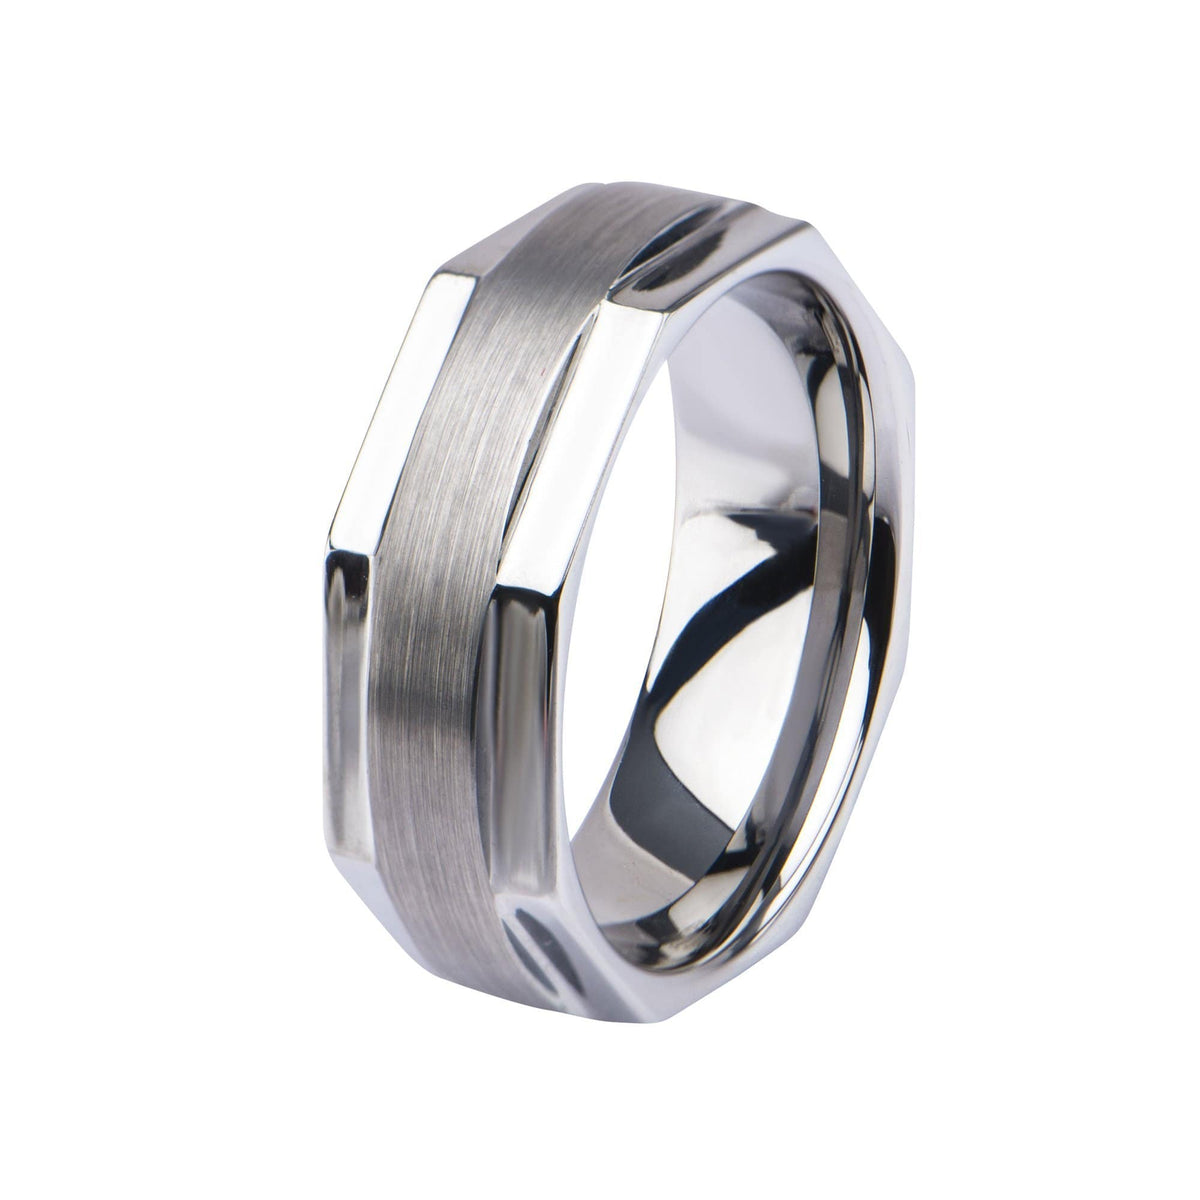 INOX JEWELRY Rings Silver Tone Stainless Steel Octogonal Band Ring